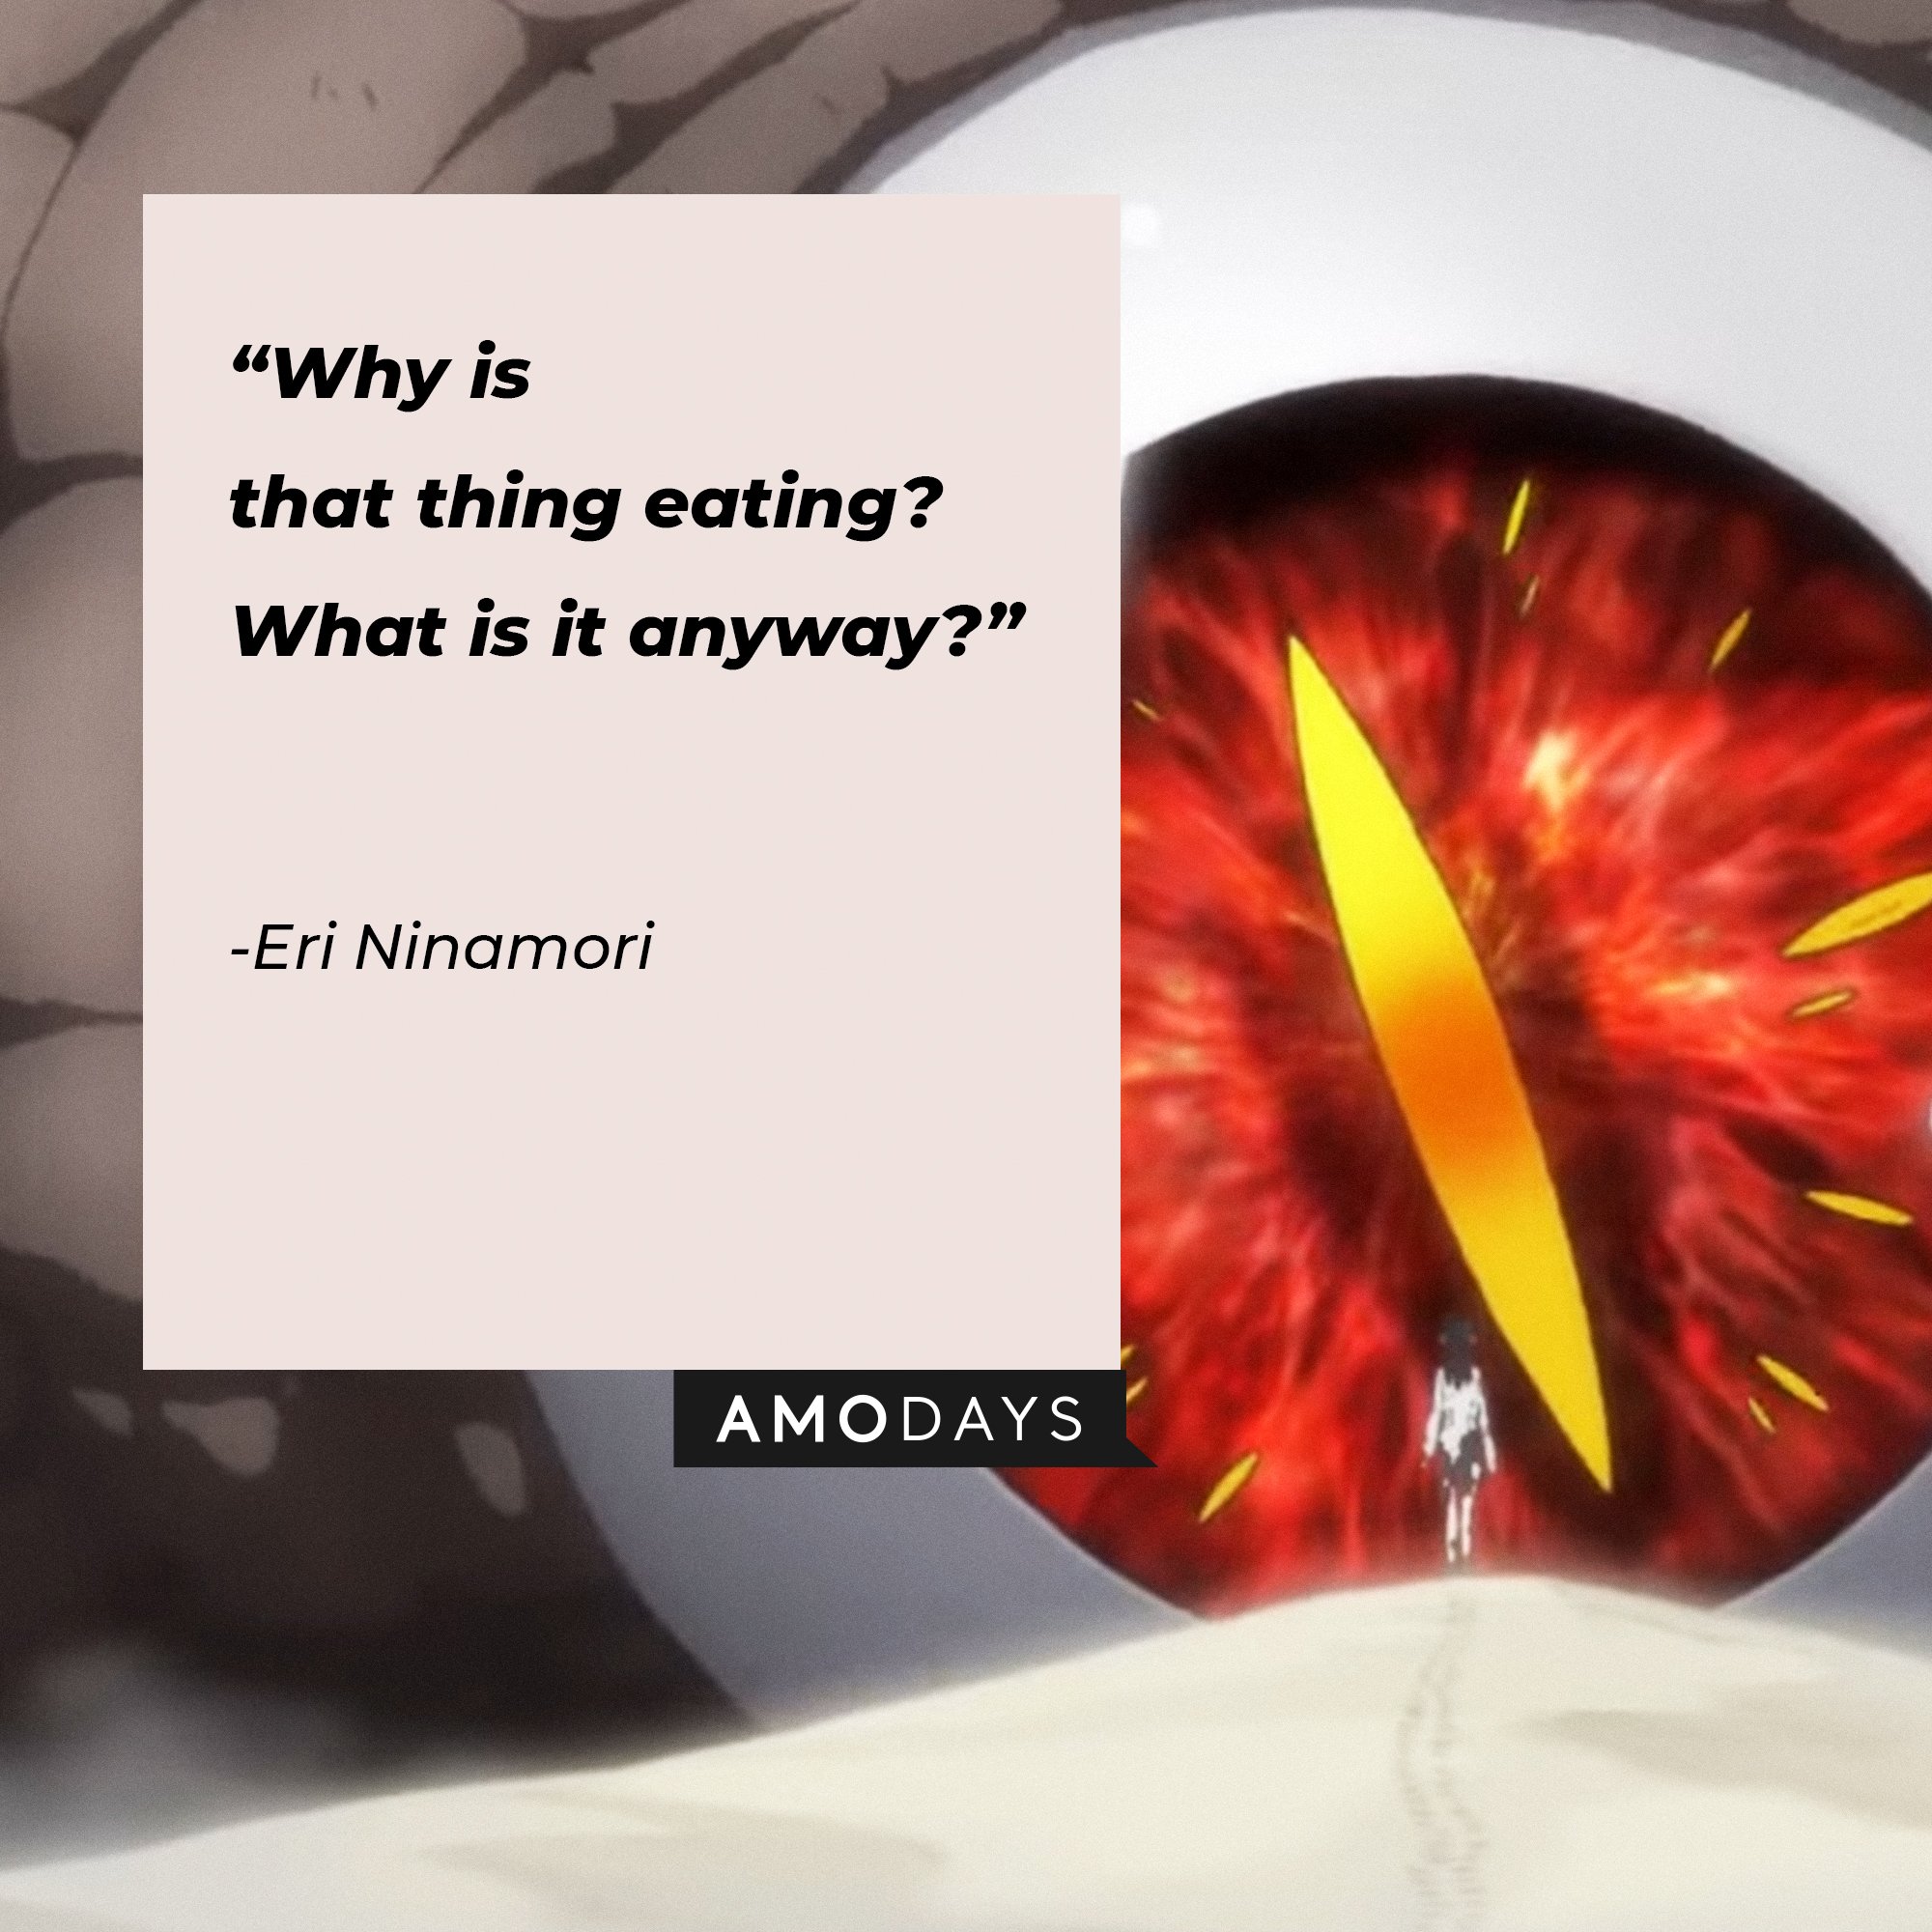 Eri Ninamori’s quote: “Why is that thing eating? What is it anyway?” | Image: AmoDays